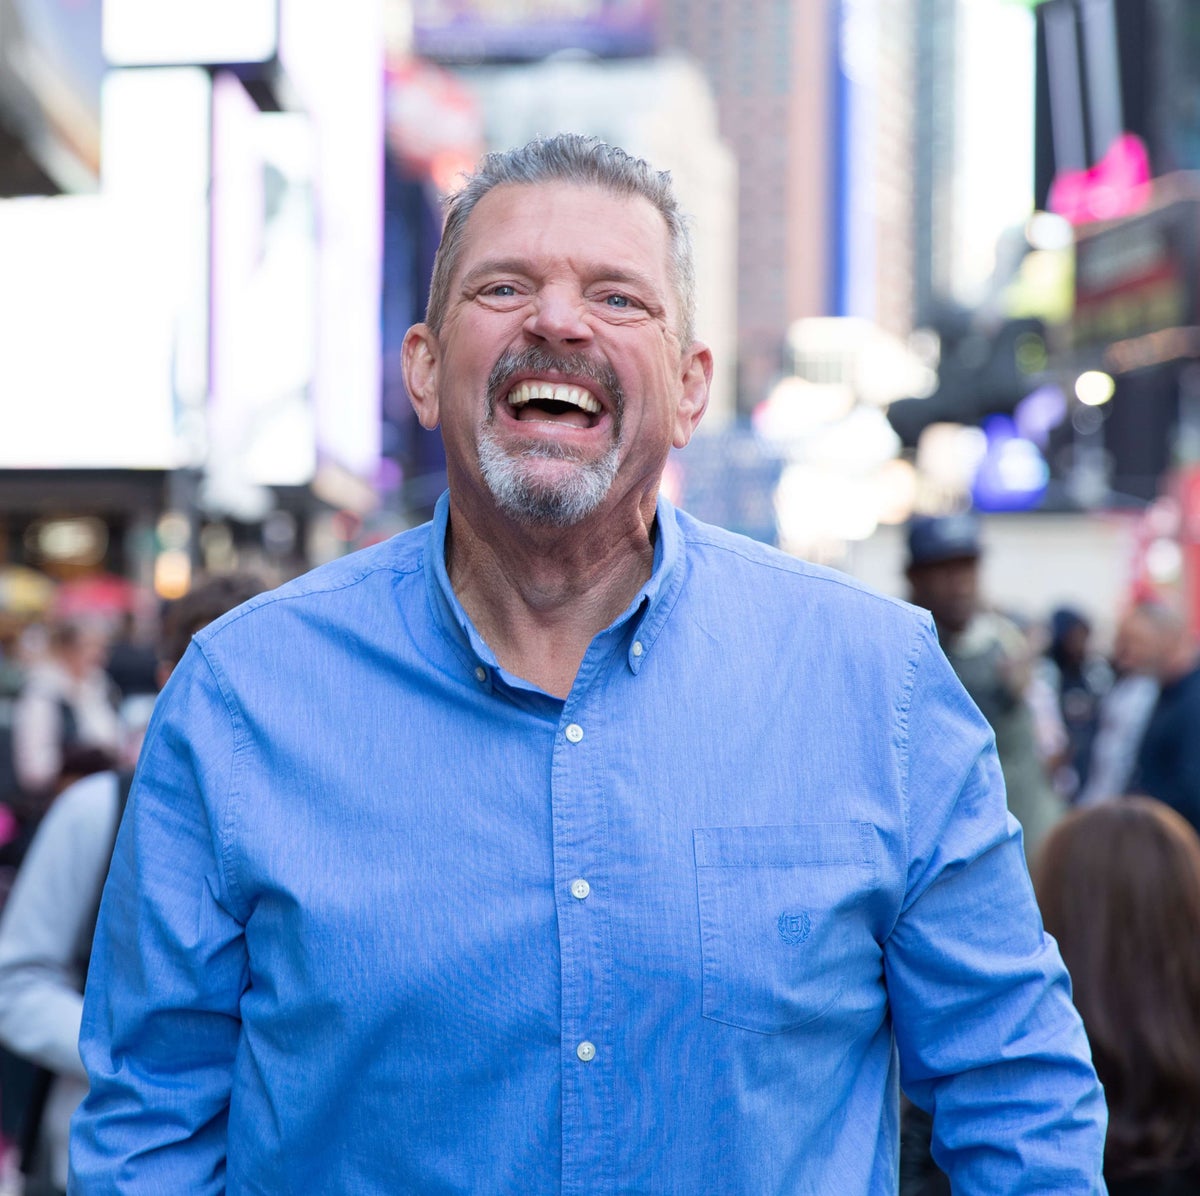 Image of a man laughing in a city